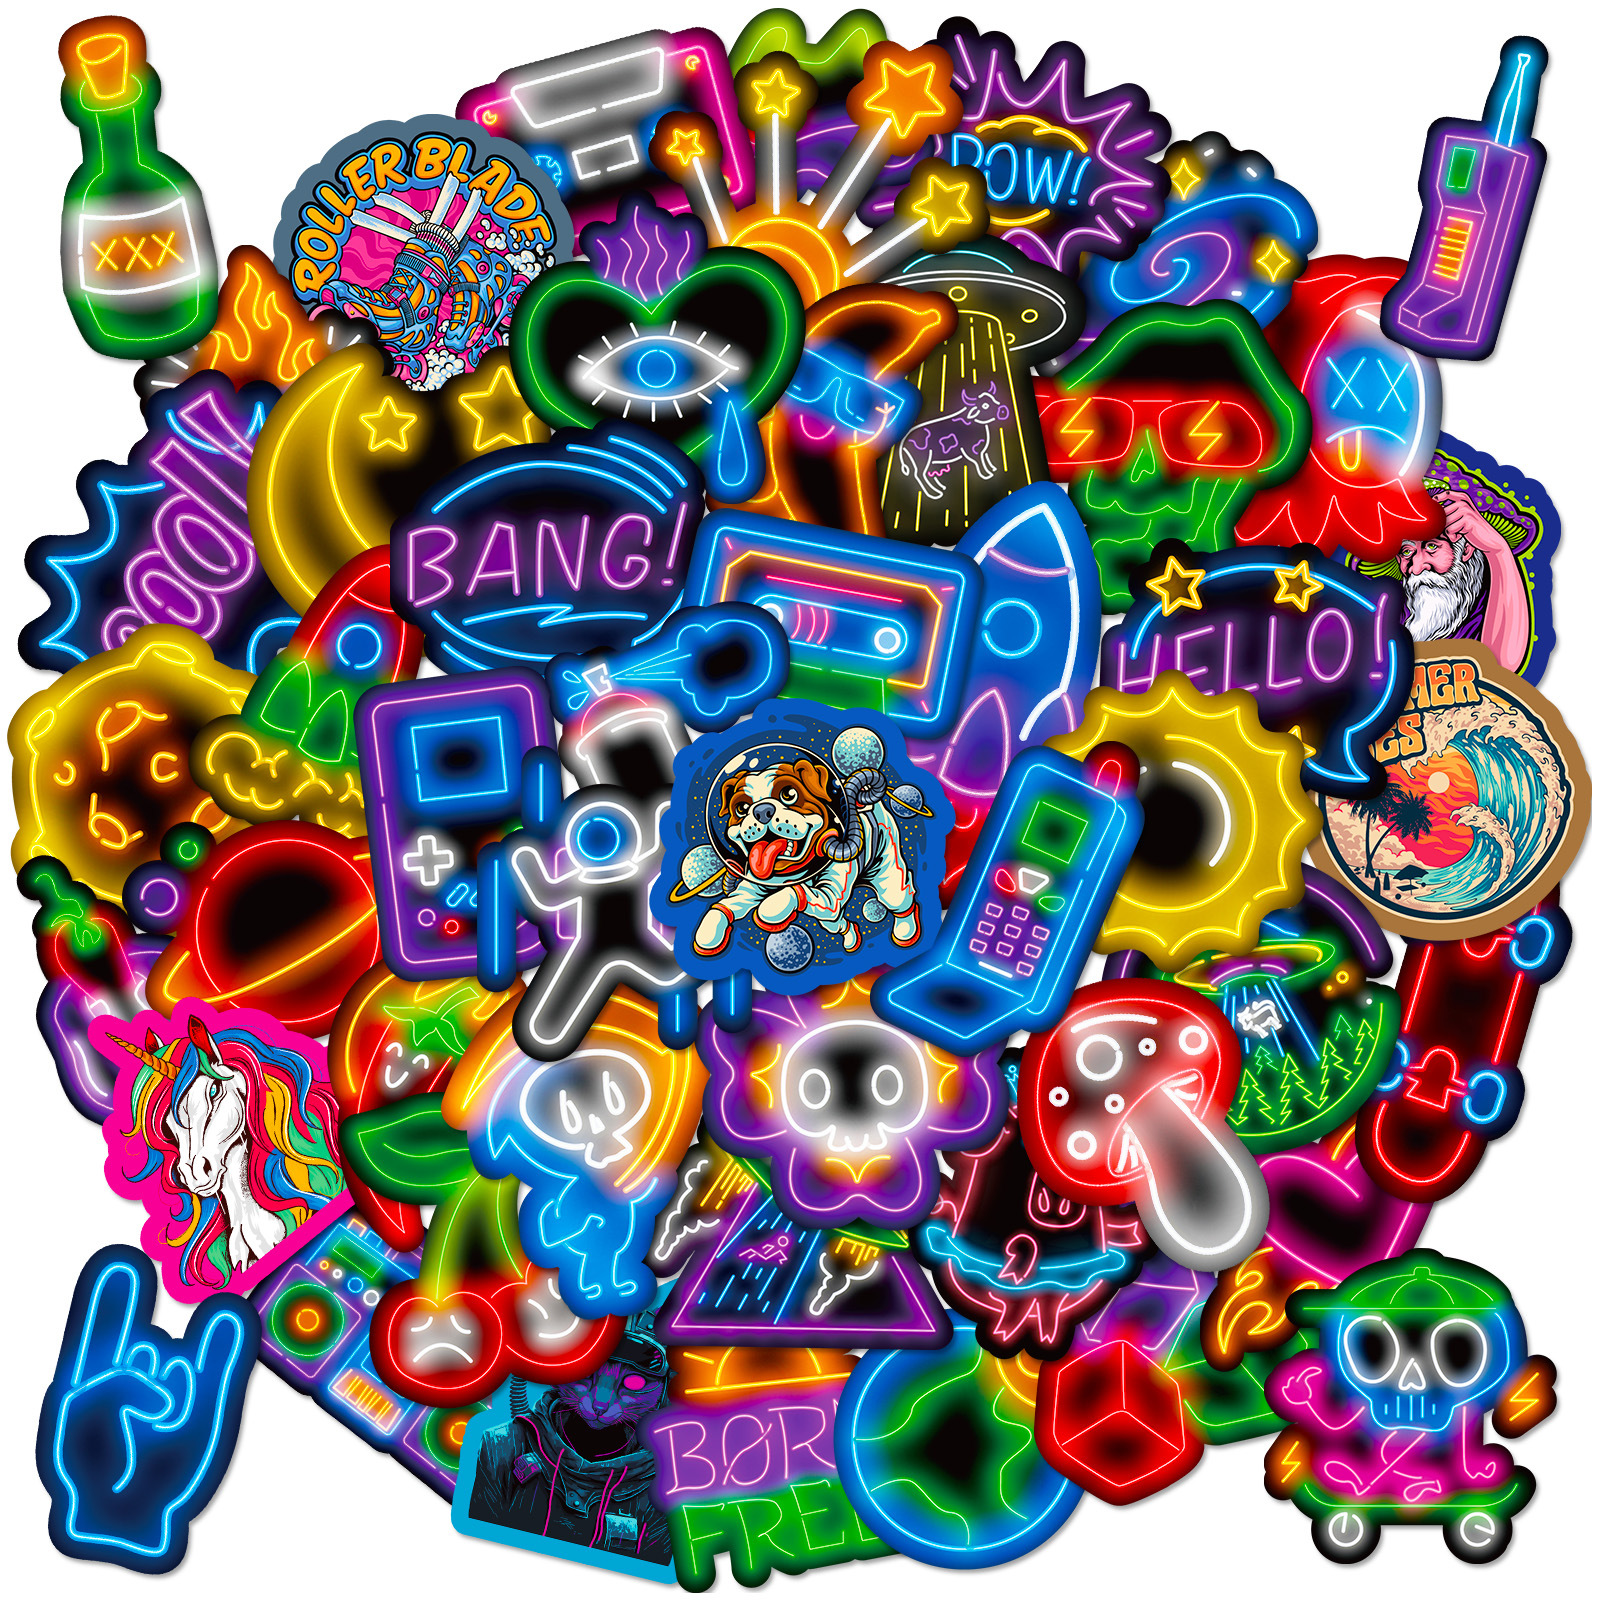 100PCS Neon Stickers for Laptop,Waterproof Vinyl Stickers for Water  Bottle,Skateboard,Luggage,Phone Case,Graffiti Vitange Stickers for Adults  and